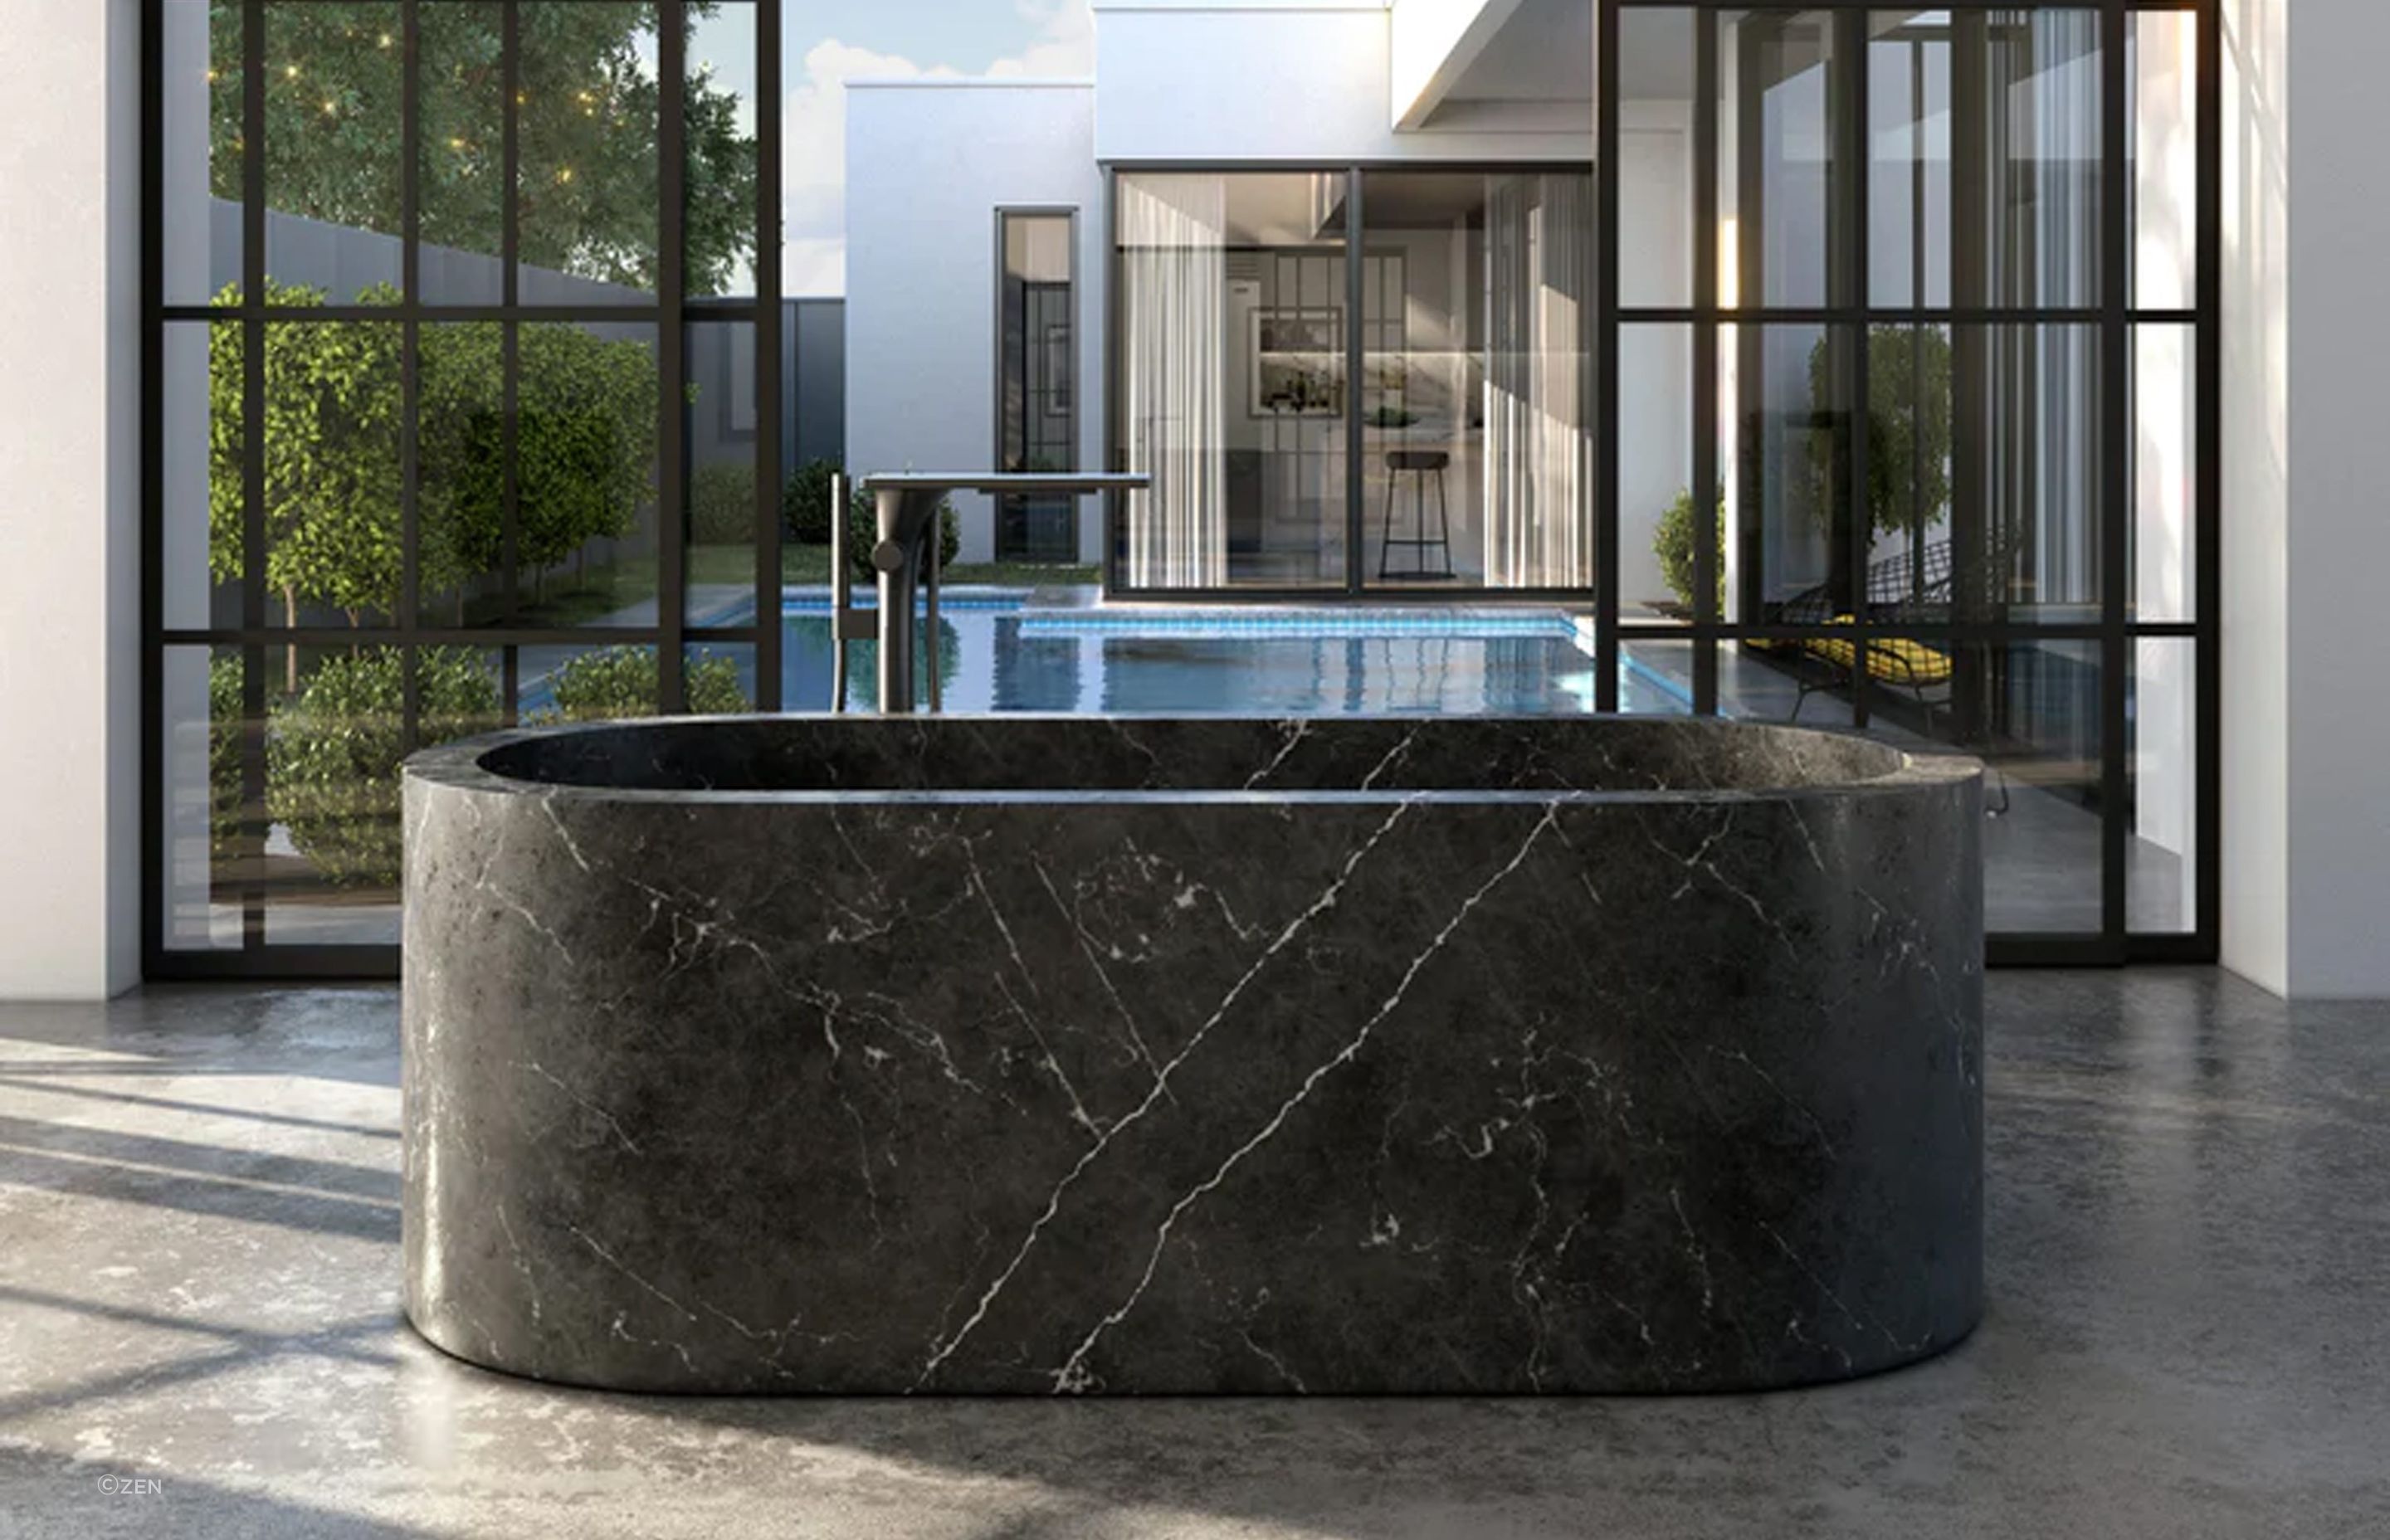 Carved from a single piece of solid marble, the Zen Oblong Bath is, quite simply, a work of art.